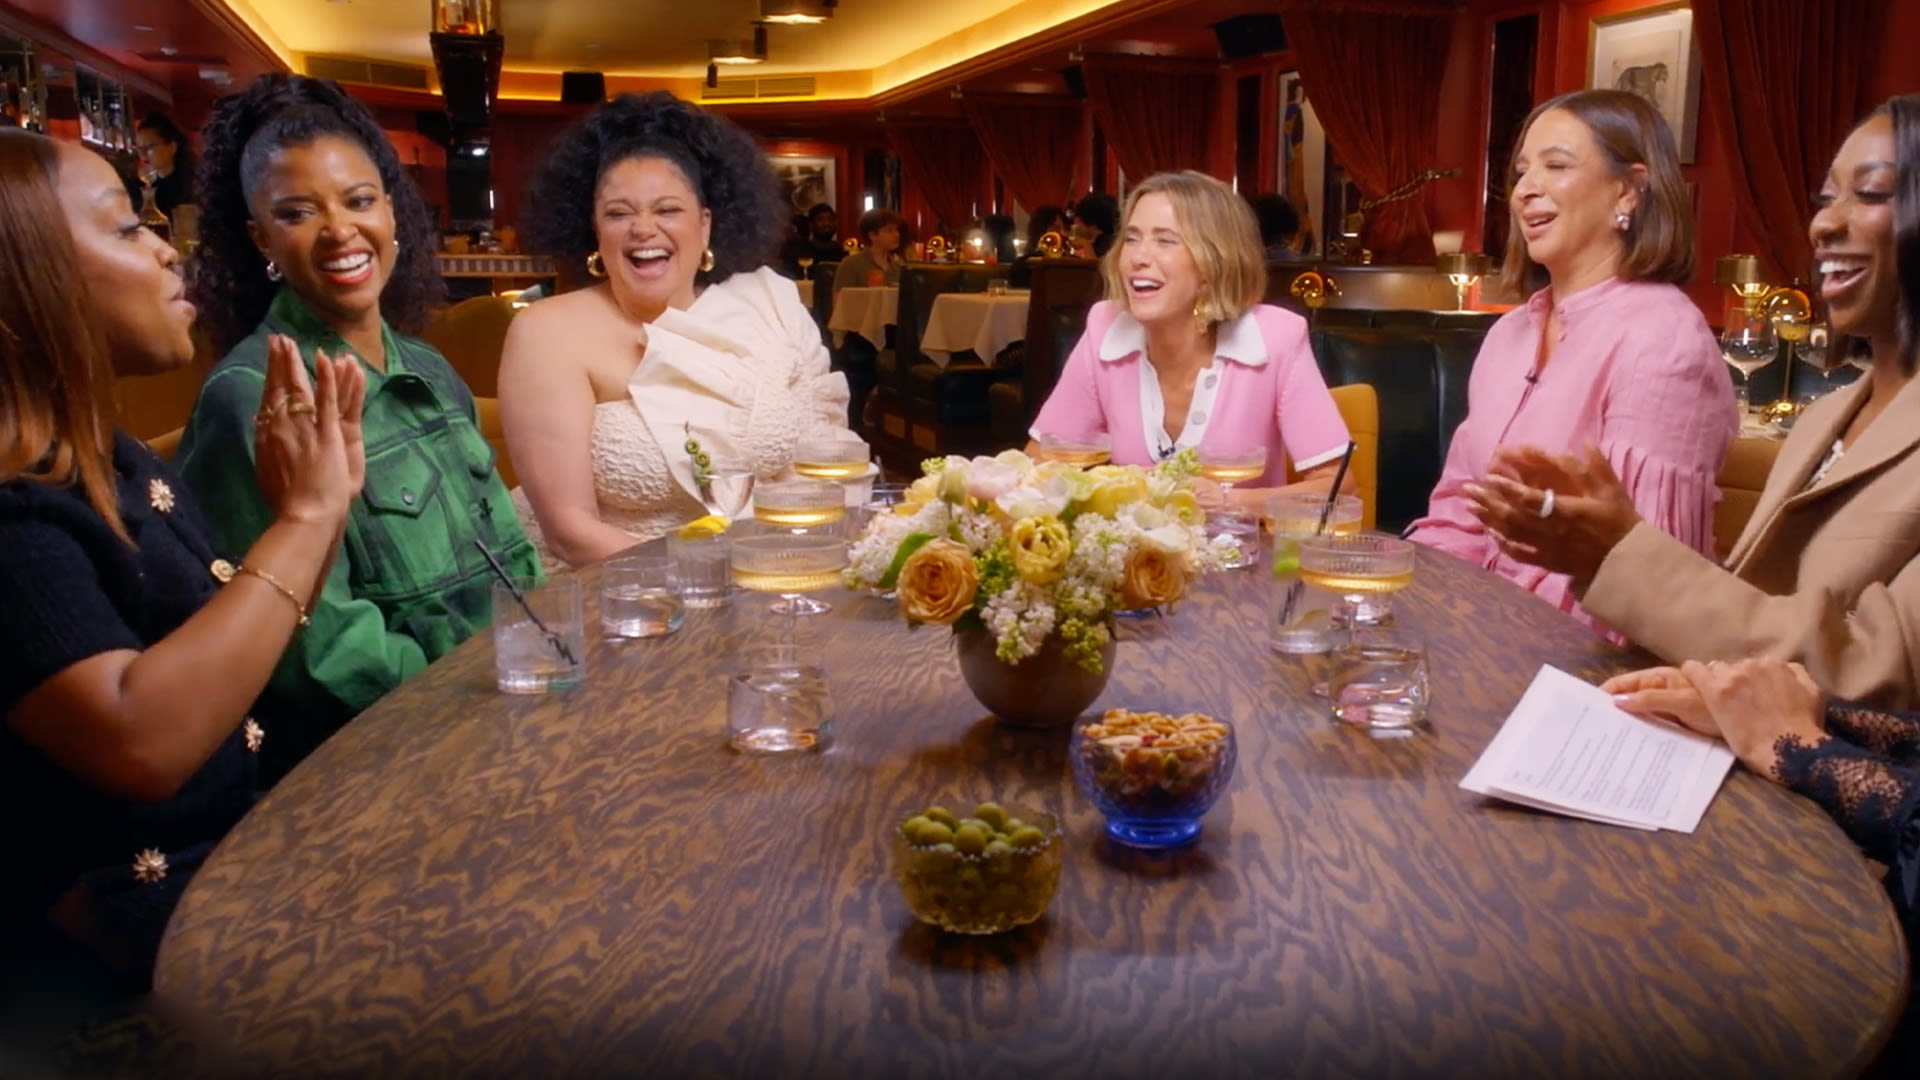 Watch The Hollywood Reporter’s Full, Uncensored Comedy Actress Roundtable